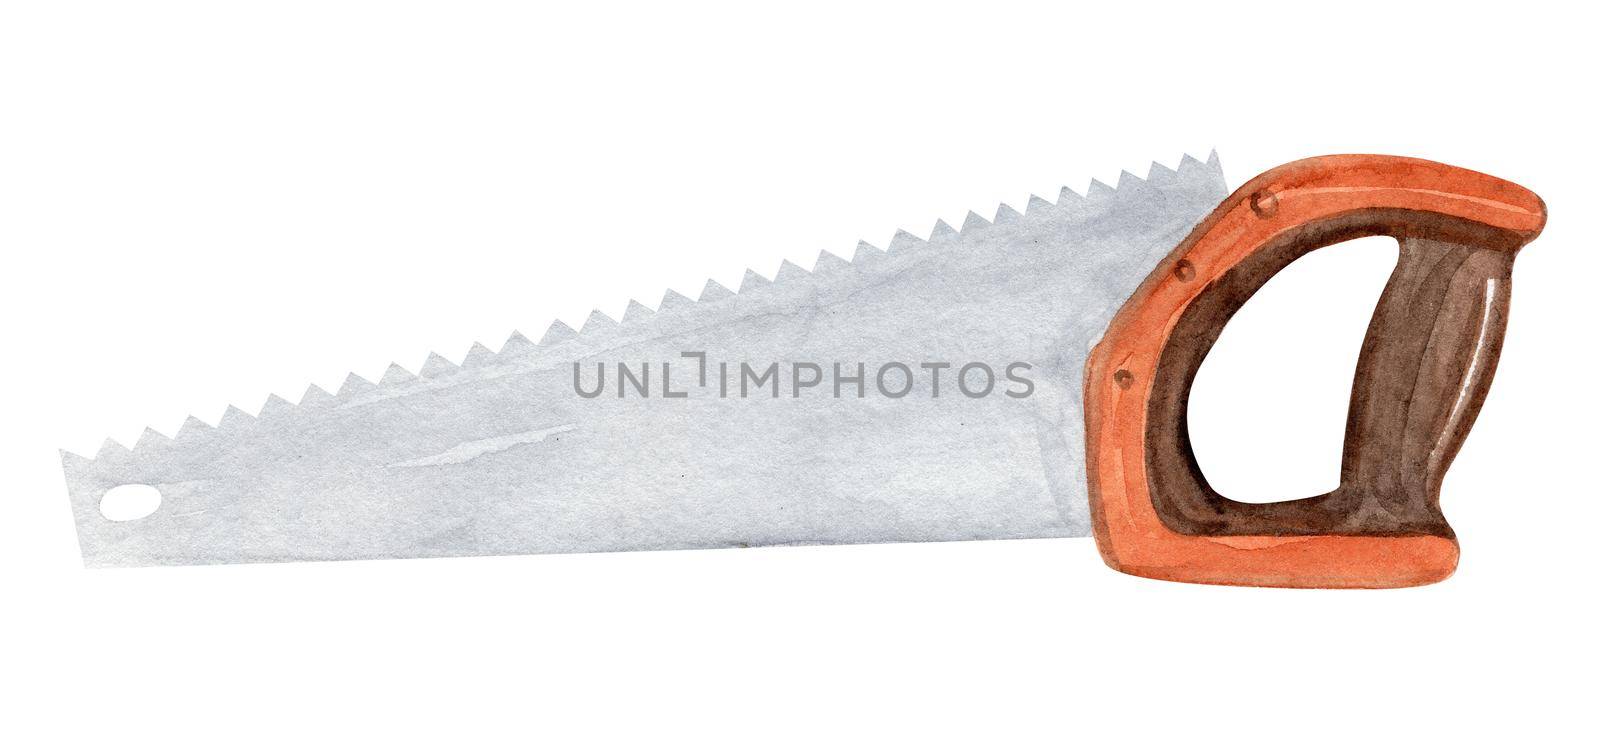 Watercolor orange saw tool isolated on white background